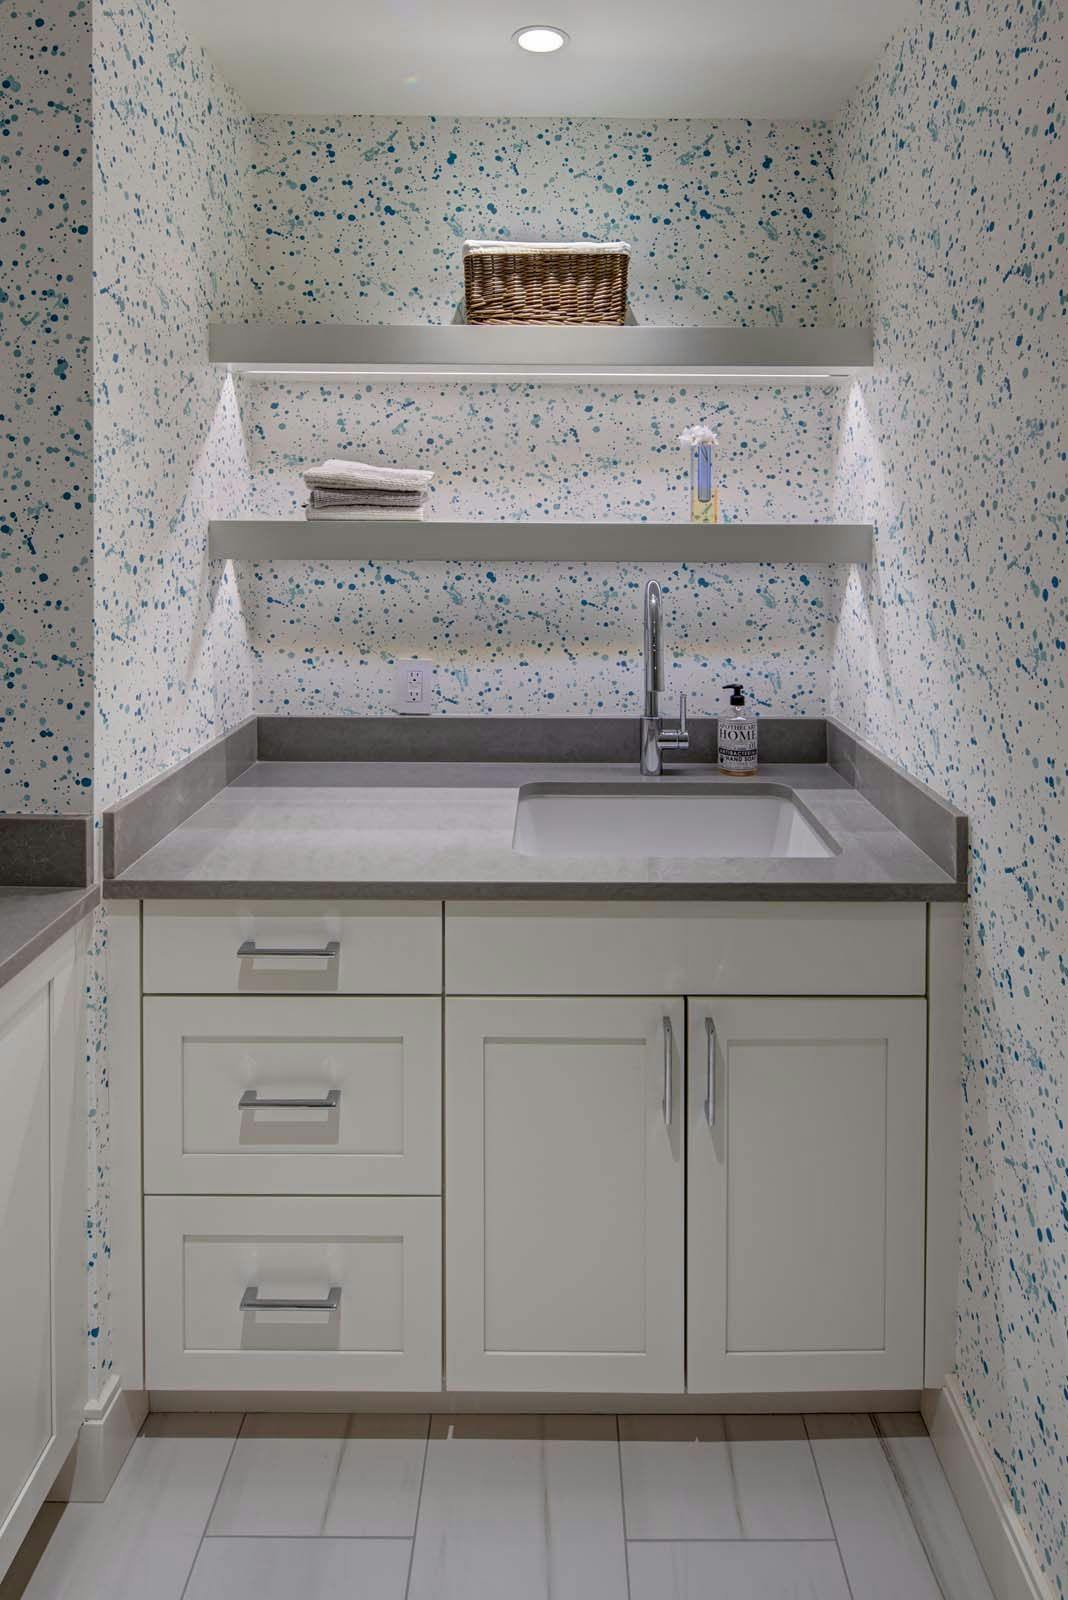 mini sink and cabinets with shelving